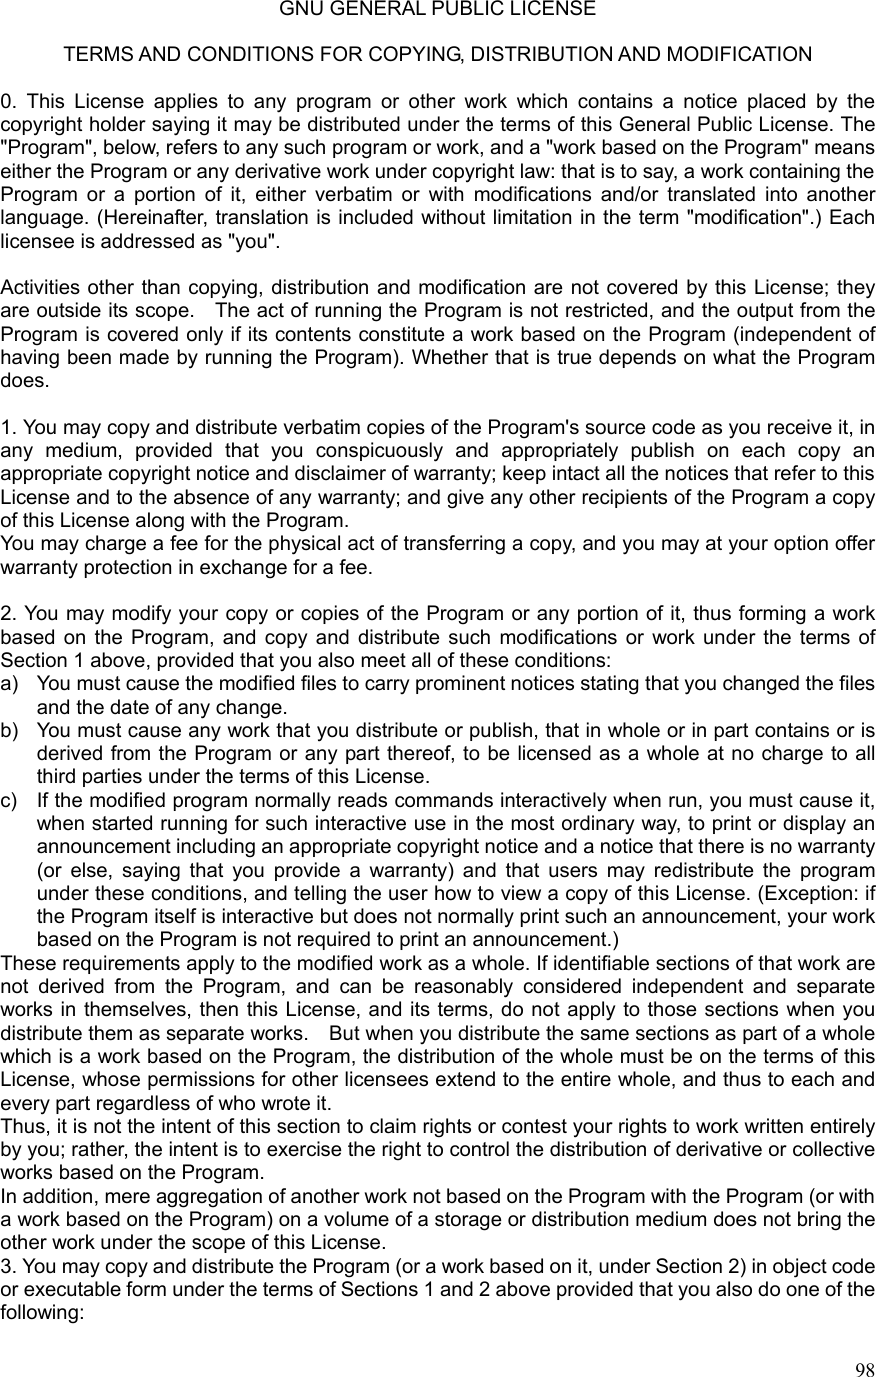  98GNU GENERAL PUBLIC LICENSE  TERMS AND CONDITIONS FOR COPYING, DISTRIBUTION AND MODIFICATION  0. This License applies to any program or other work which contains a notice placed by the copyright holder saying it may be distributed under the terms of this General Public License. The &quot;Program&quot;, below, refers to any such program or work, and a &quot;work based on the Program&quot; means either the Program or any derivative work under copyright law: that is to say, a work containing the Program or a portion of it, either verbatim or with modifications and/or translated into another language. (Hereinafter, translation is included without limitation in the term &quot;modification&quot;.) Each licensee is addressed as &quot;you&quot;.  Activities other than copying, distribution and modification are not covered by this License; they are outside its scope.    The act of running the Program is not restricted, and the output from the Program is covered only if its contents constitute a work based on the Program (independent of having been made by running the Program). Whether that is true depends on what the Program does.  1. You may copy and distribute verbatim copies of the Program&apos;s source code as you receive it, in any medium, provided that you conspicuously and appropriately publish on each copy an appropriate copyright notice and disclaimer of warranty; keep intact all the notices that refer to this License and to the absence of any warranty; and give any other recipients of the Program a copy of this License along with the Program. You may charge a fee for the physical act of transferring a copy, and you may at your option offer warranty protection in exchange for a fee.  2. You may modify your copy or copies of the Program or any portion of it, thus forming a work based on the Program, and copy and distribute such modifications or work under the terms of Section 1 above, provided that you also meet all of these conditions: a)  You must cause the modified files to carry prominent notices stating that you changed the files and the date of any change. b)  You must cause any work that you distribute or publish, that in whole or in part contains or is derived from the Program or any part thereof, to be licensed as a whole at no charge to all third parties under the terms of this License. c)  If the modified program normally reads commands interactively when run, you must cause it, when started running for such interactive use in the most ordinary way, to print or display an announcement including an appropriate copyright notice and a notice that there is no warranty (or else, saying that you provide a warranty) and that users may redistribute the program under these conditions, and telling the user how to view a copy of this License. (Exception: if the Program itself is interactive but does not normally print such an announcement, your work based on the Program is not required to print an announcement.) These requirements apply to the modified work as a whole. If identifiable sections of that work are not derived from the Program, and can be reasonably considered independent and separate works in themselves, then this License, and its terms, do not apply to those sections when you distribute them as separate works.    But when you distribute the same sections as part of a whole which is a work based on the Program, the distribution of the whole must be on the terms of this License, whose permissions for other licensees extend to the entire whole, and thus to each and every part regardless of who wrote it. Thus, it is not the intent of this section to claim rights or contest your rights to work written entirely by you; rather, the intent is to exercise the right to control the distribution of derivative or collective works based on the Program. In addition, mere aggregation of another work not based on the Program with the Program (or with a work based on the Program) on a volume of a storage or distribution medium does not bring the other work under the scope of this License. 3. You may copy and distribute the Program (or a work based on it, under Section 2) in object code or executable form under the terms of Sections 1 and 2 above provided that you also do one of the following: 